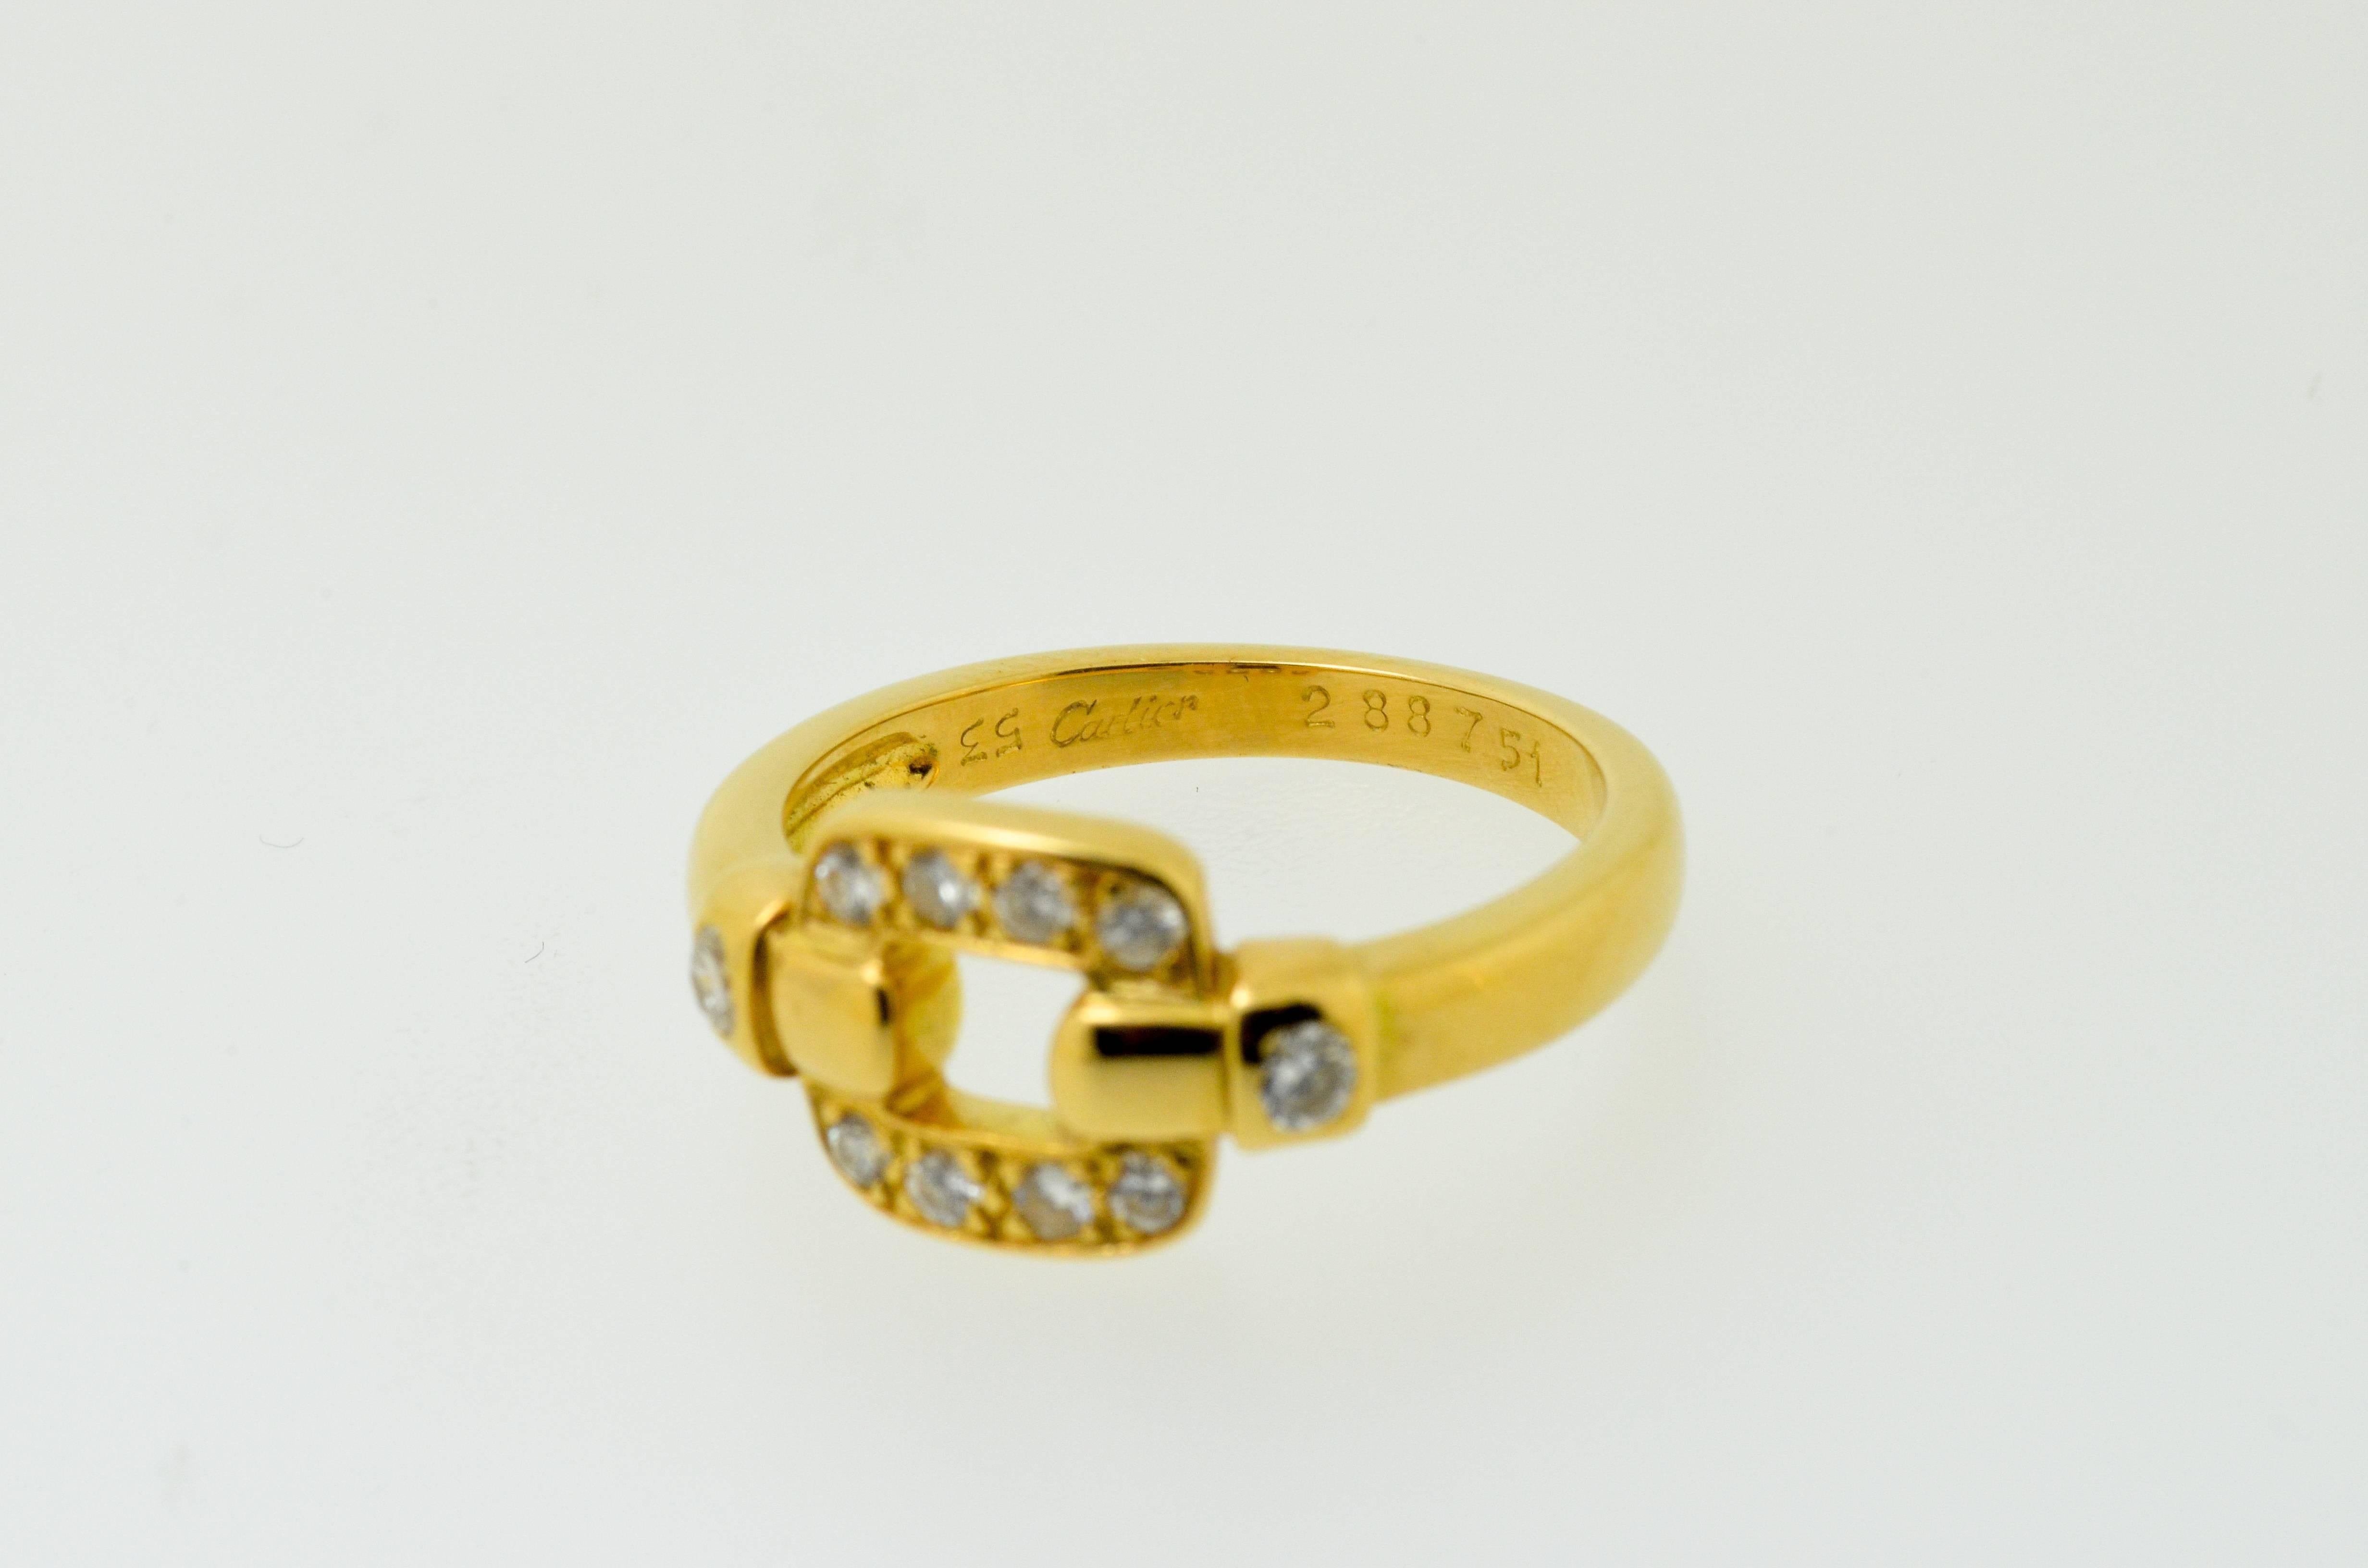 Cartier Yellow Gold and Diamond Open Buckle Ring In Excellent Condition For Sale In Fuengirola, Malaga